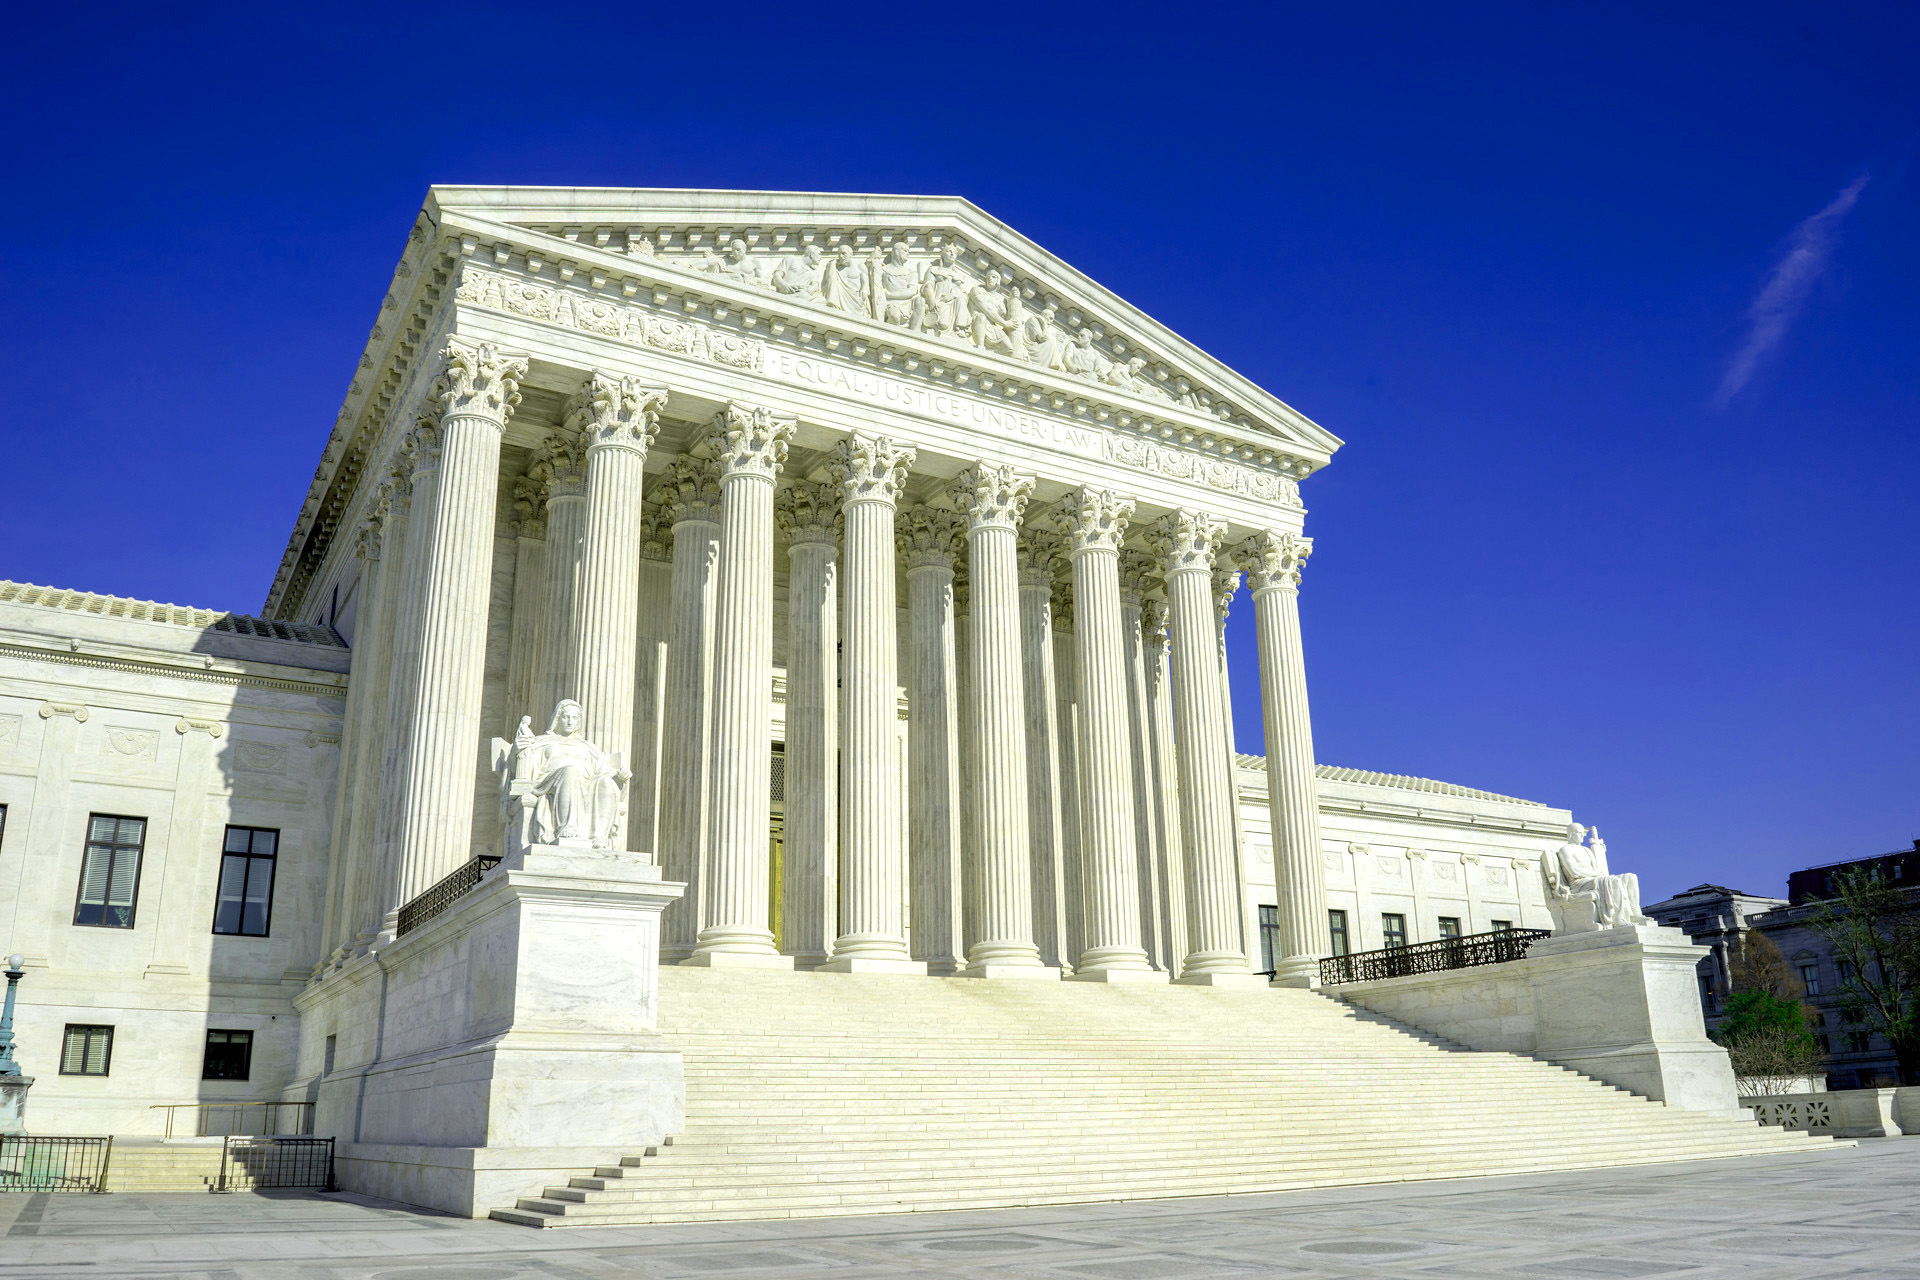 The U.S. Supreme court building has tall pillars and is flanked with two statues of judges.